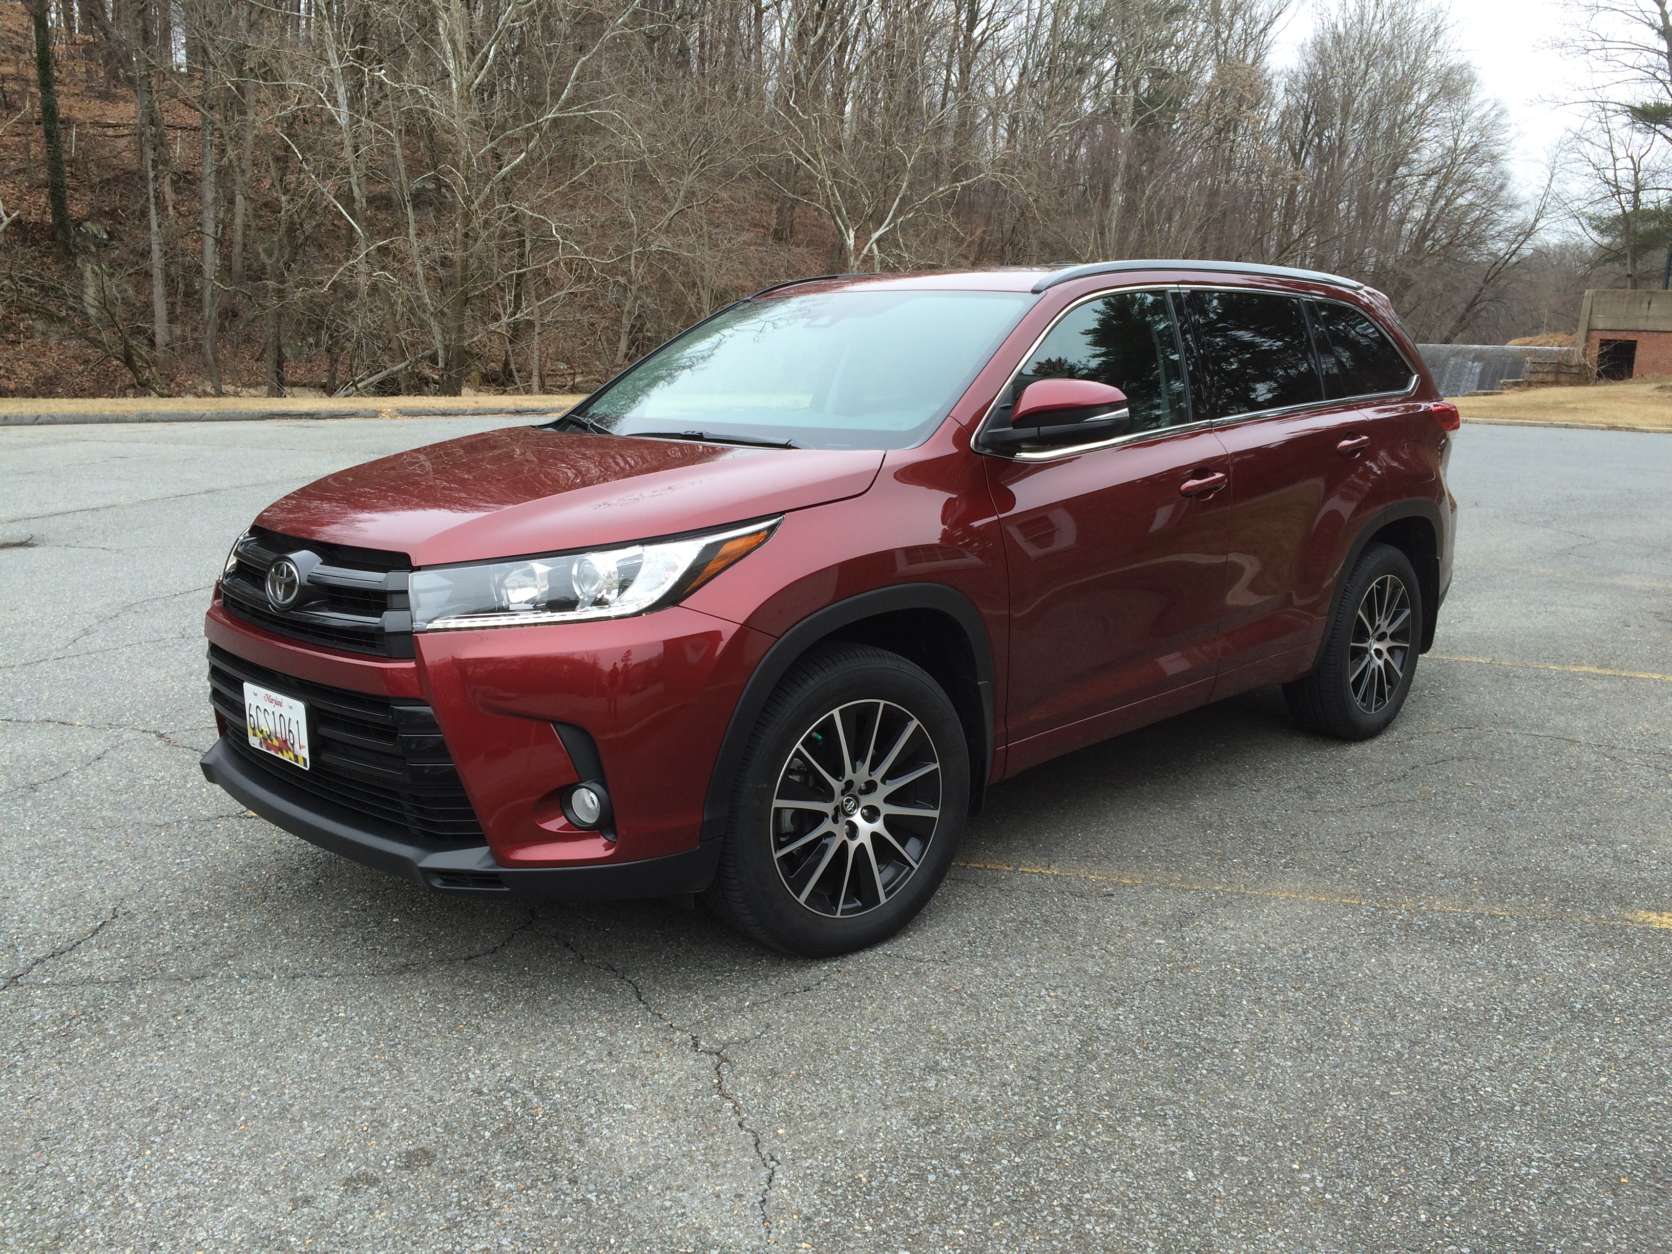 One of the stalwarts that seems to adapt to the ever-changing midsize crossover market is the Toyota Highlander with its updates for 2017. (WTOP/Mike Parris) 